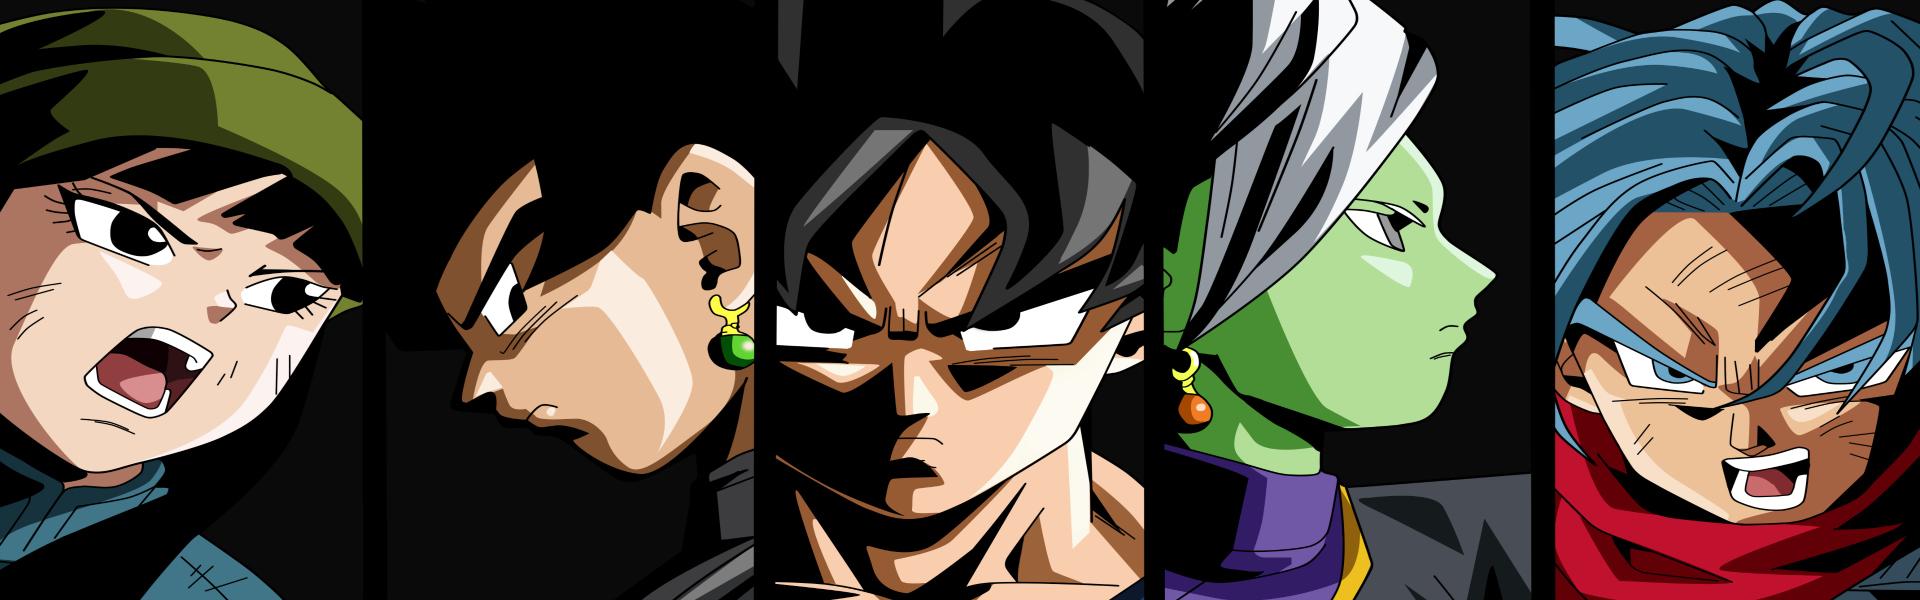 DBS BANNER!: PS4Banners